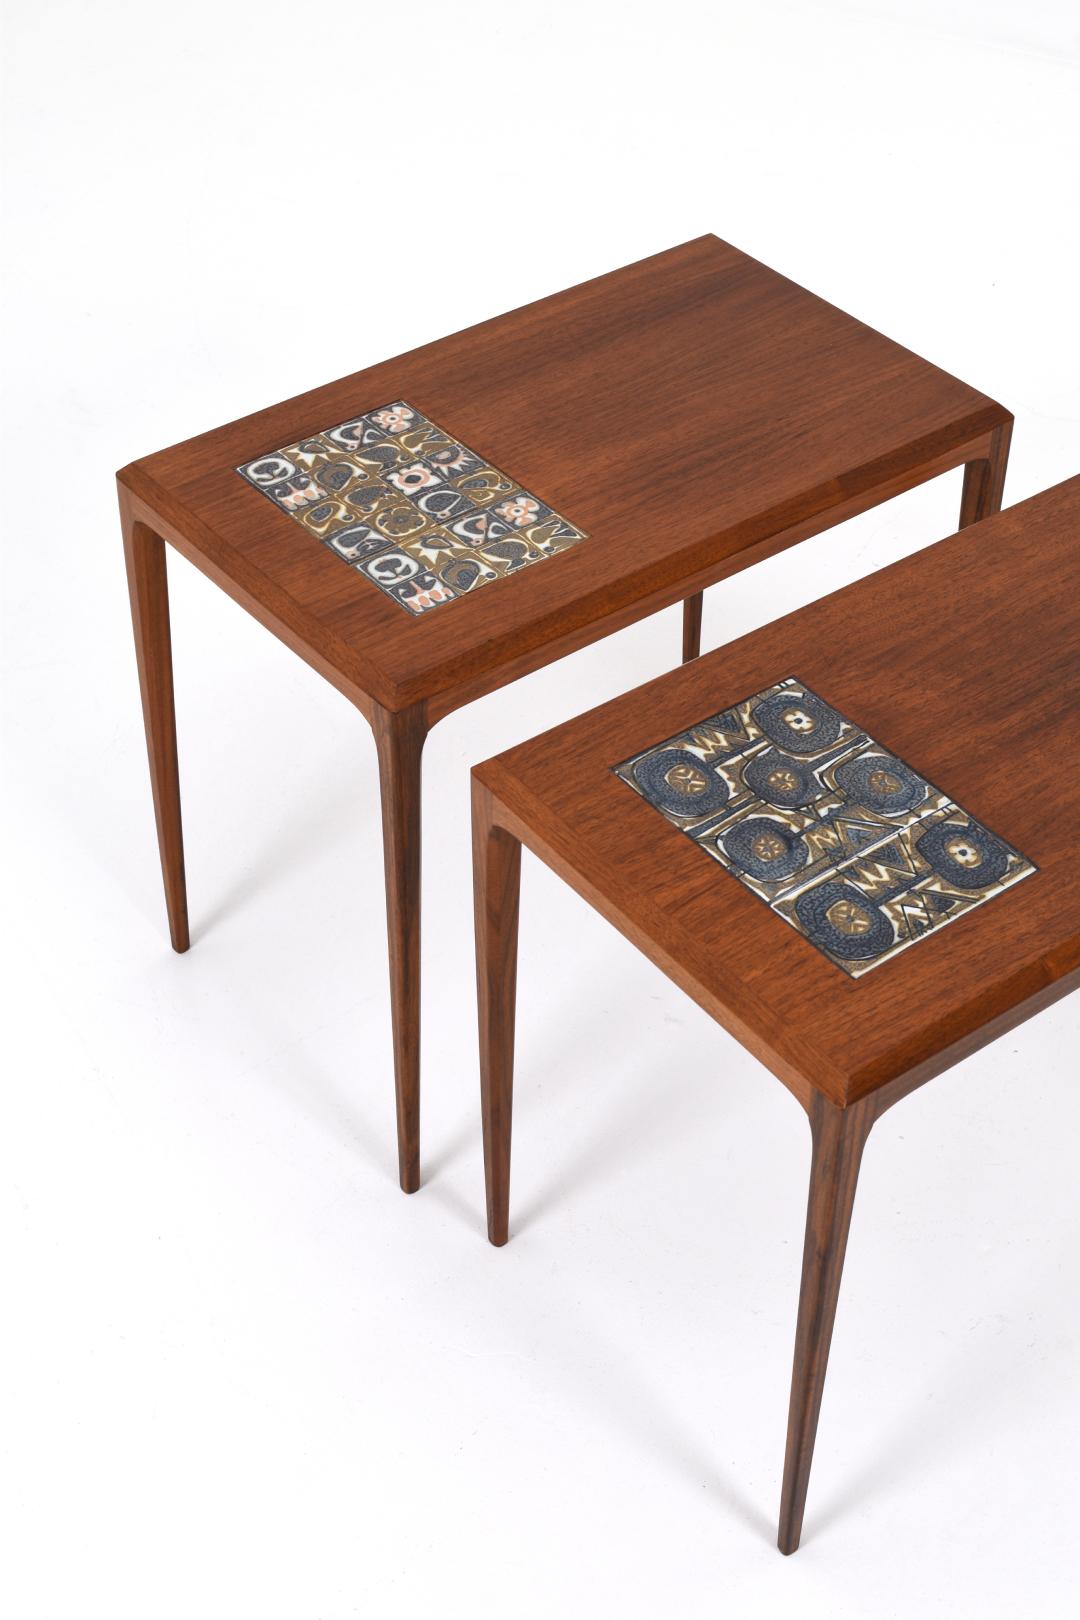 Two small side tables designed by Severin Hansen with ceramics by Nils Thorsson, Royal Copenhagen for Haslev, Denmark.

Nice side table that can be used as a bedside table or relief table next to the sofa or favorite armchair. The tables are made of